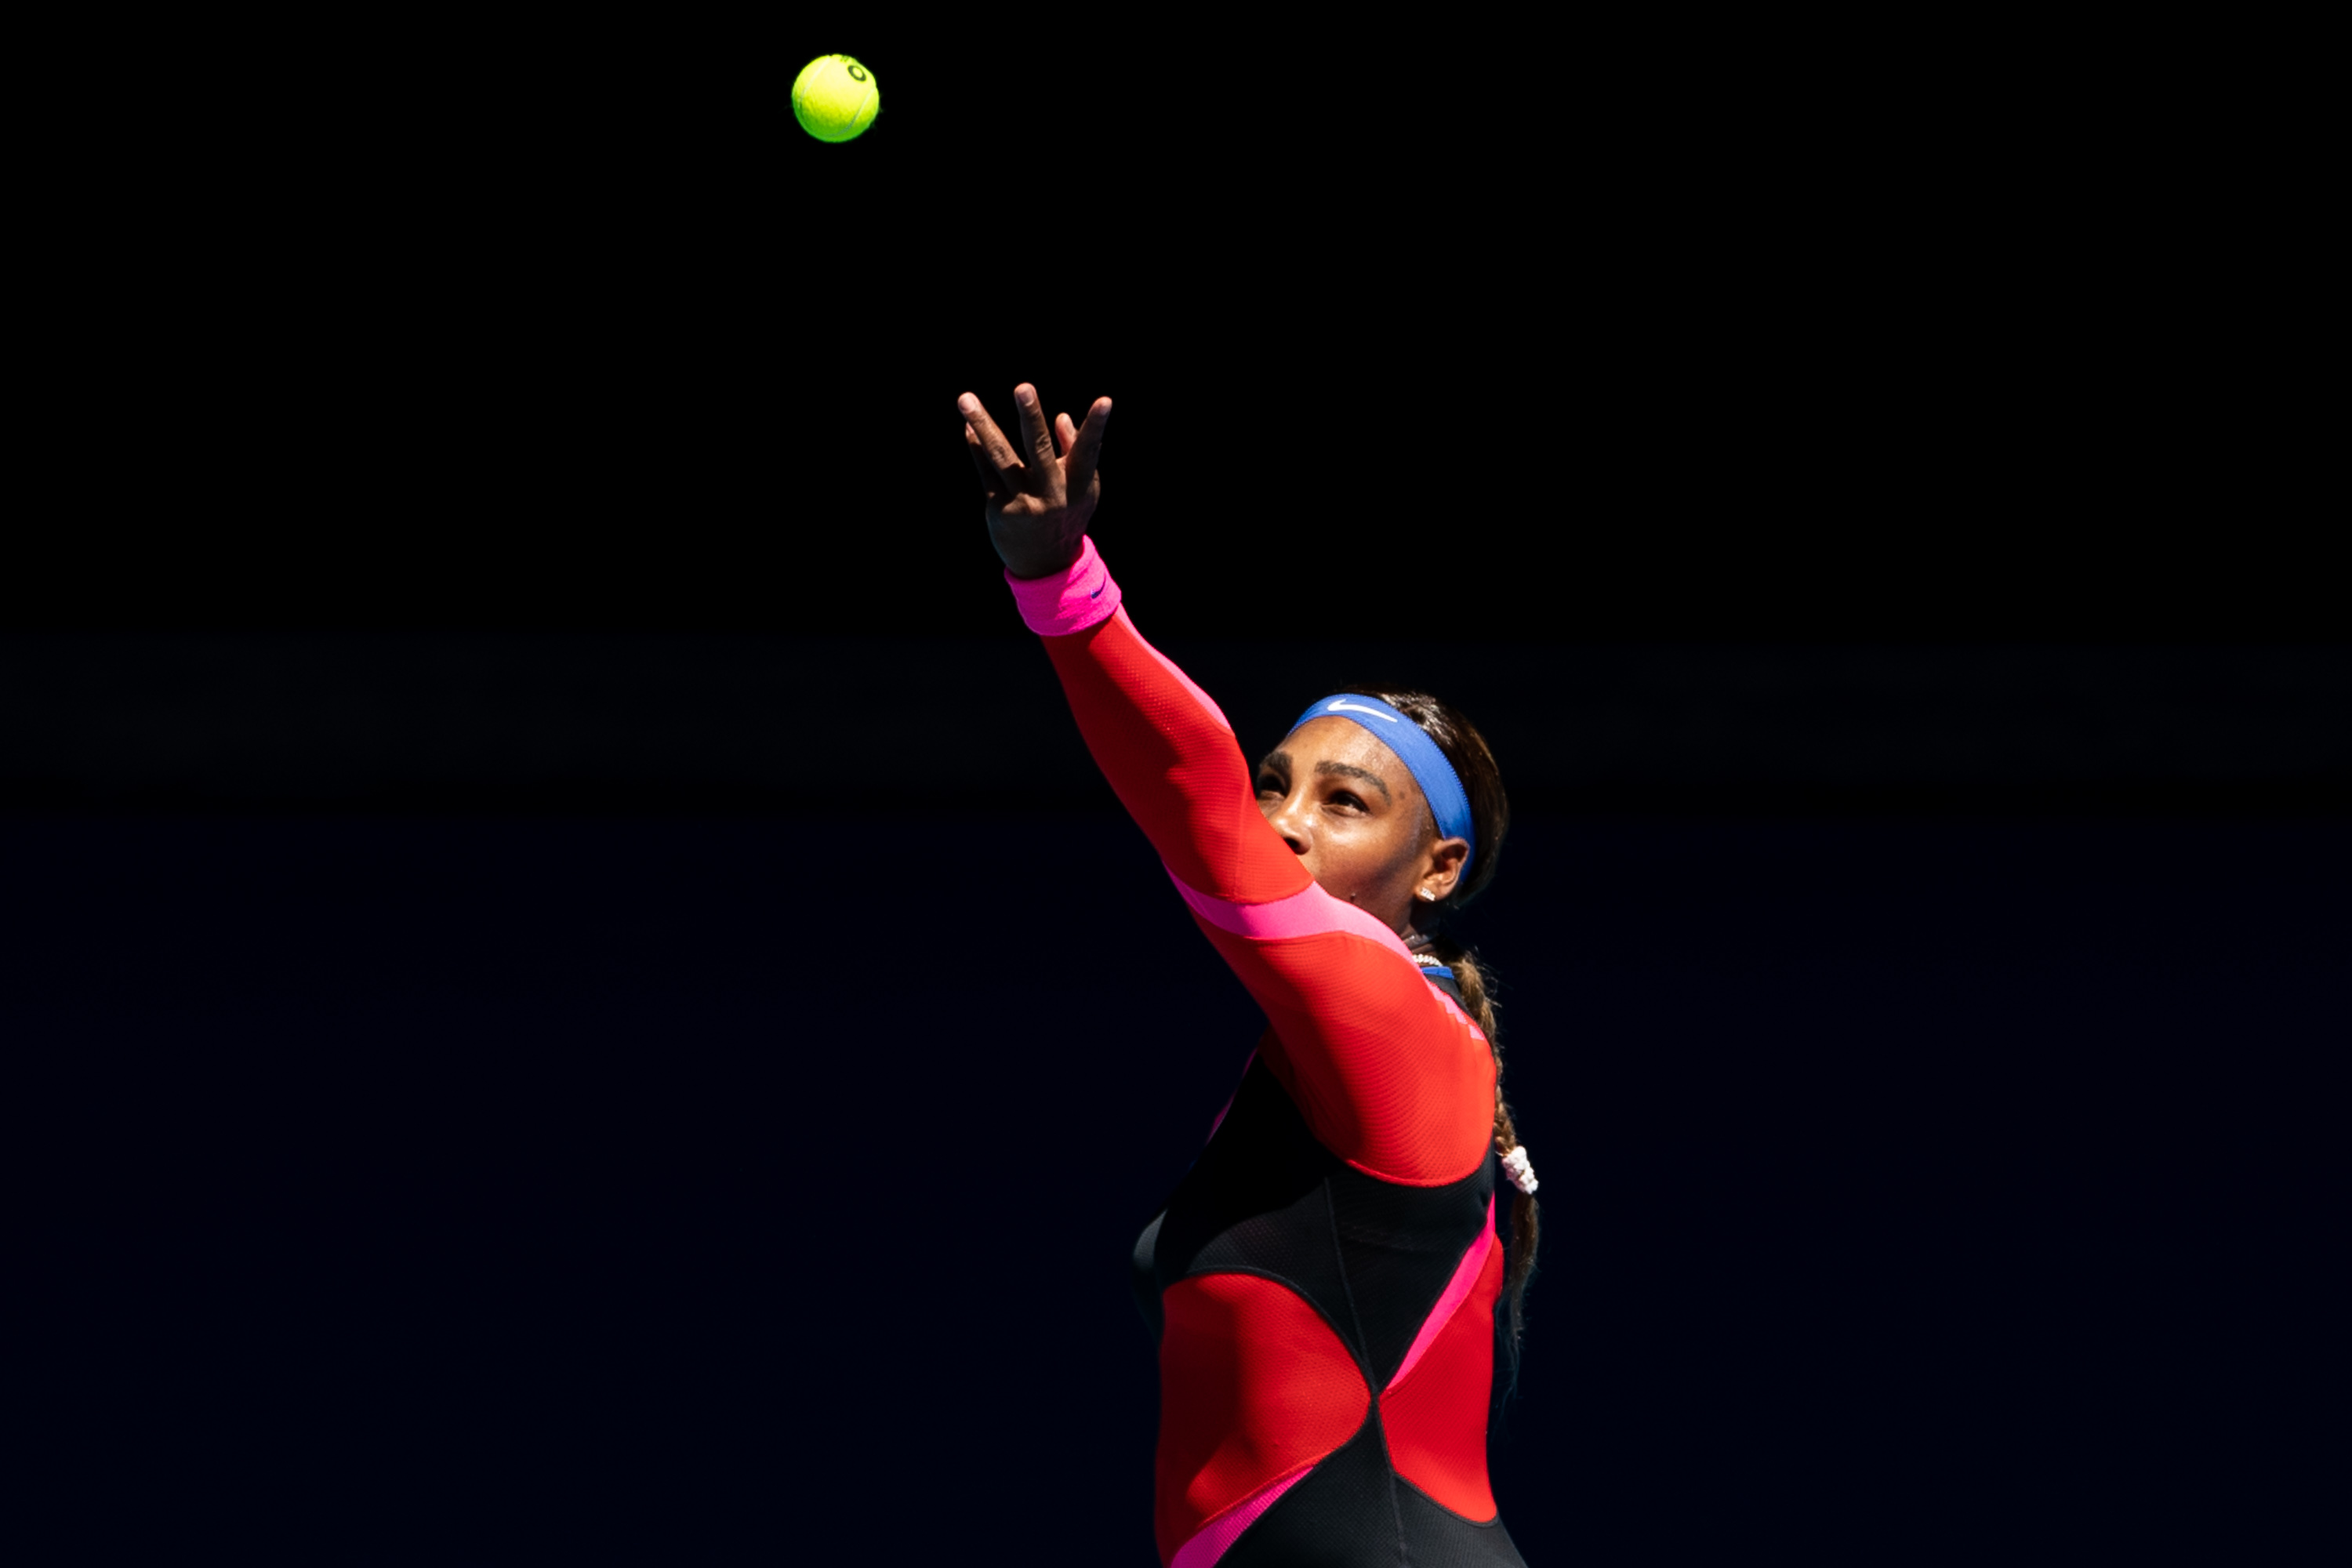 How Fast Does Tennis Star Serena Williams Serve?